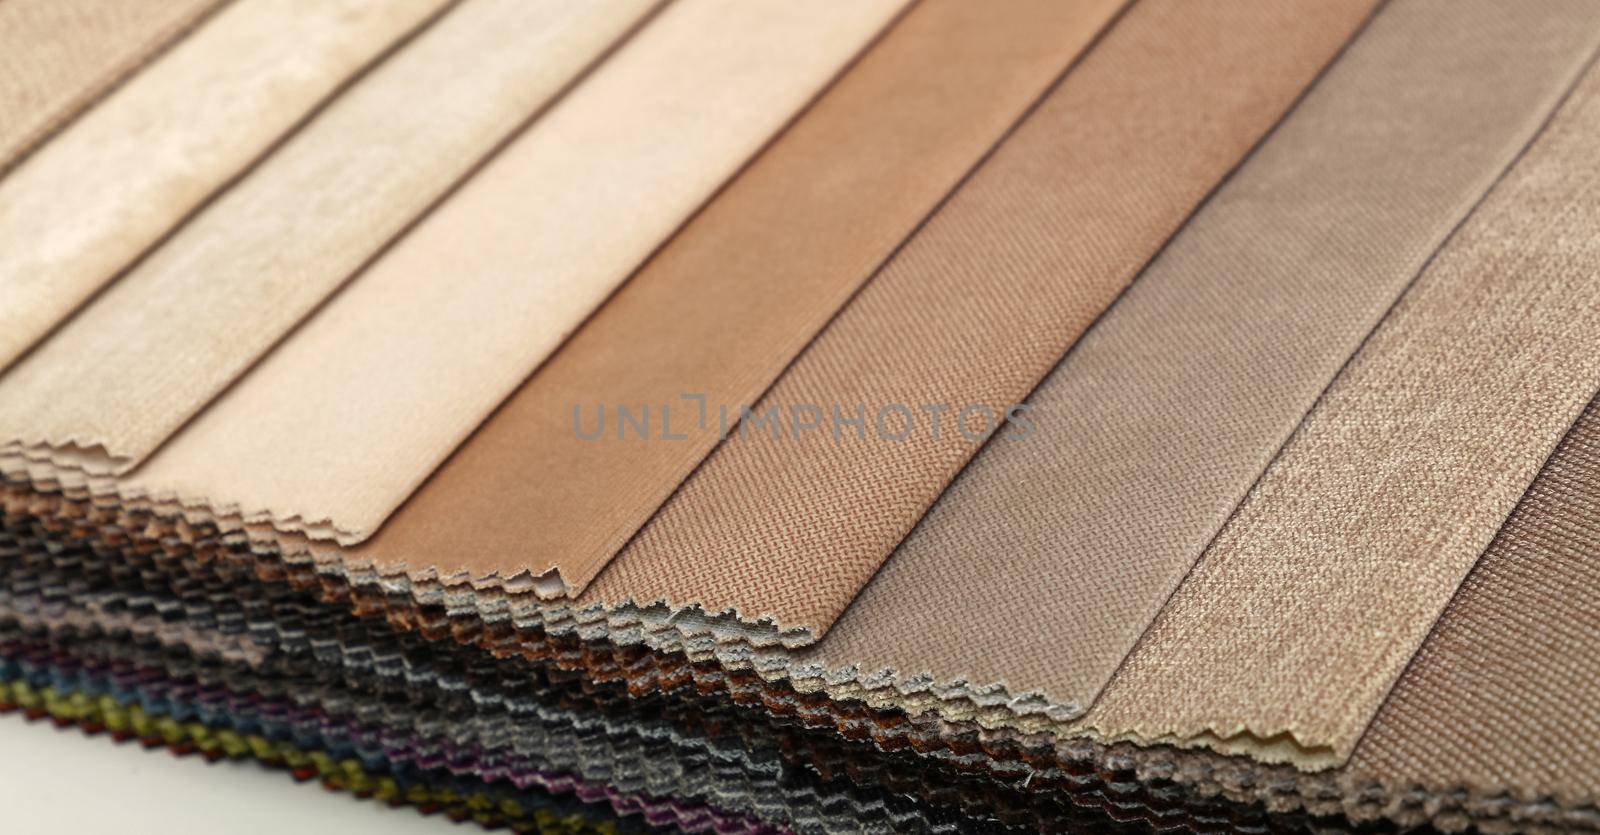 Swatch of beige and brown textile fabric by BreakingTheWalls